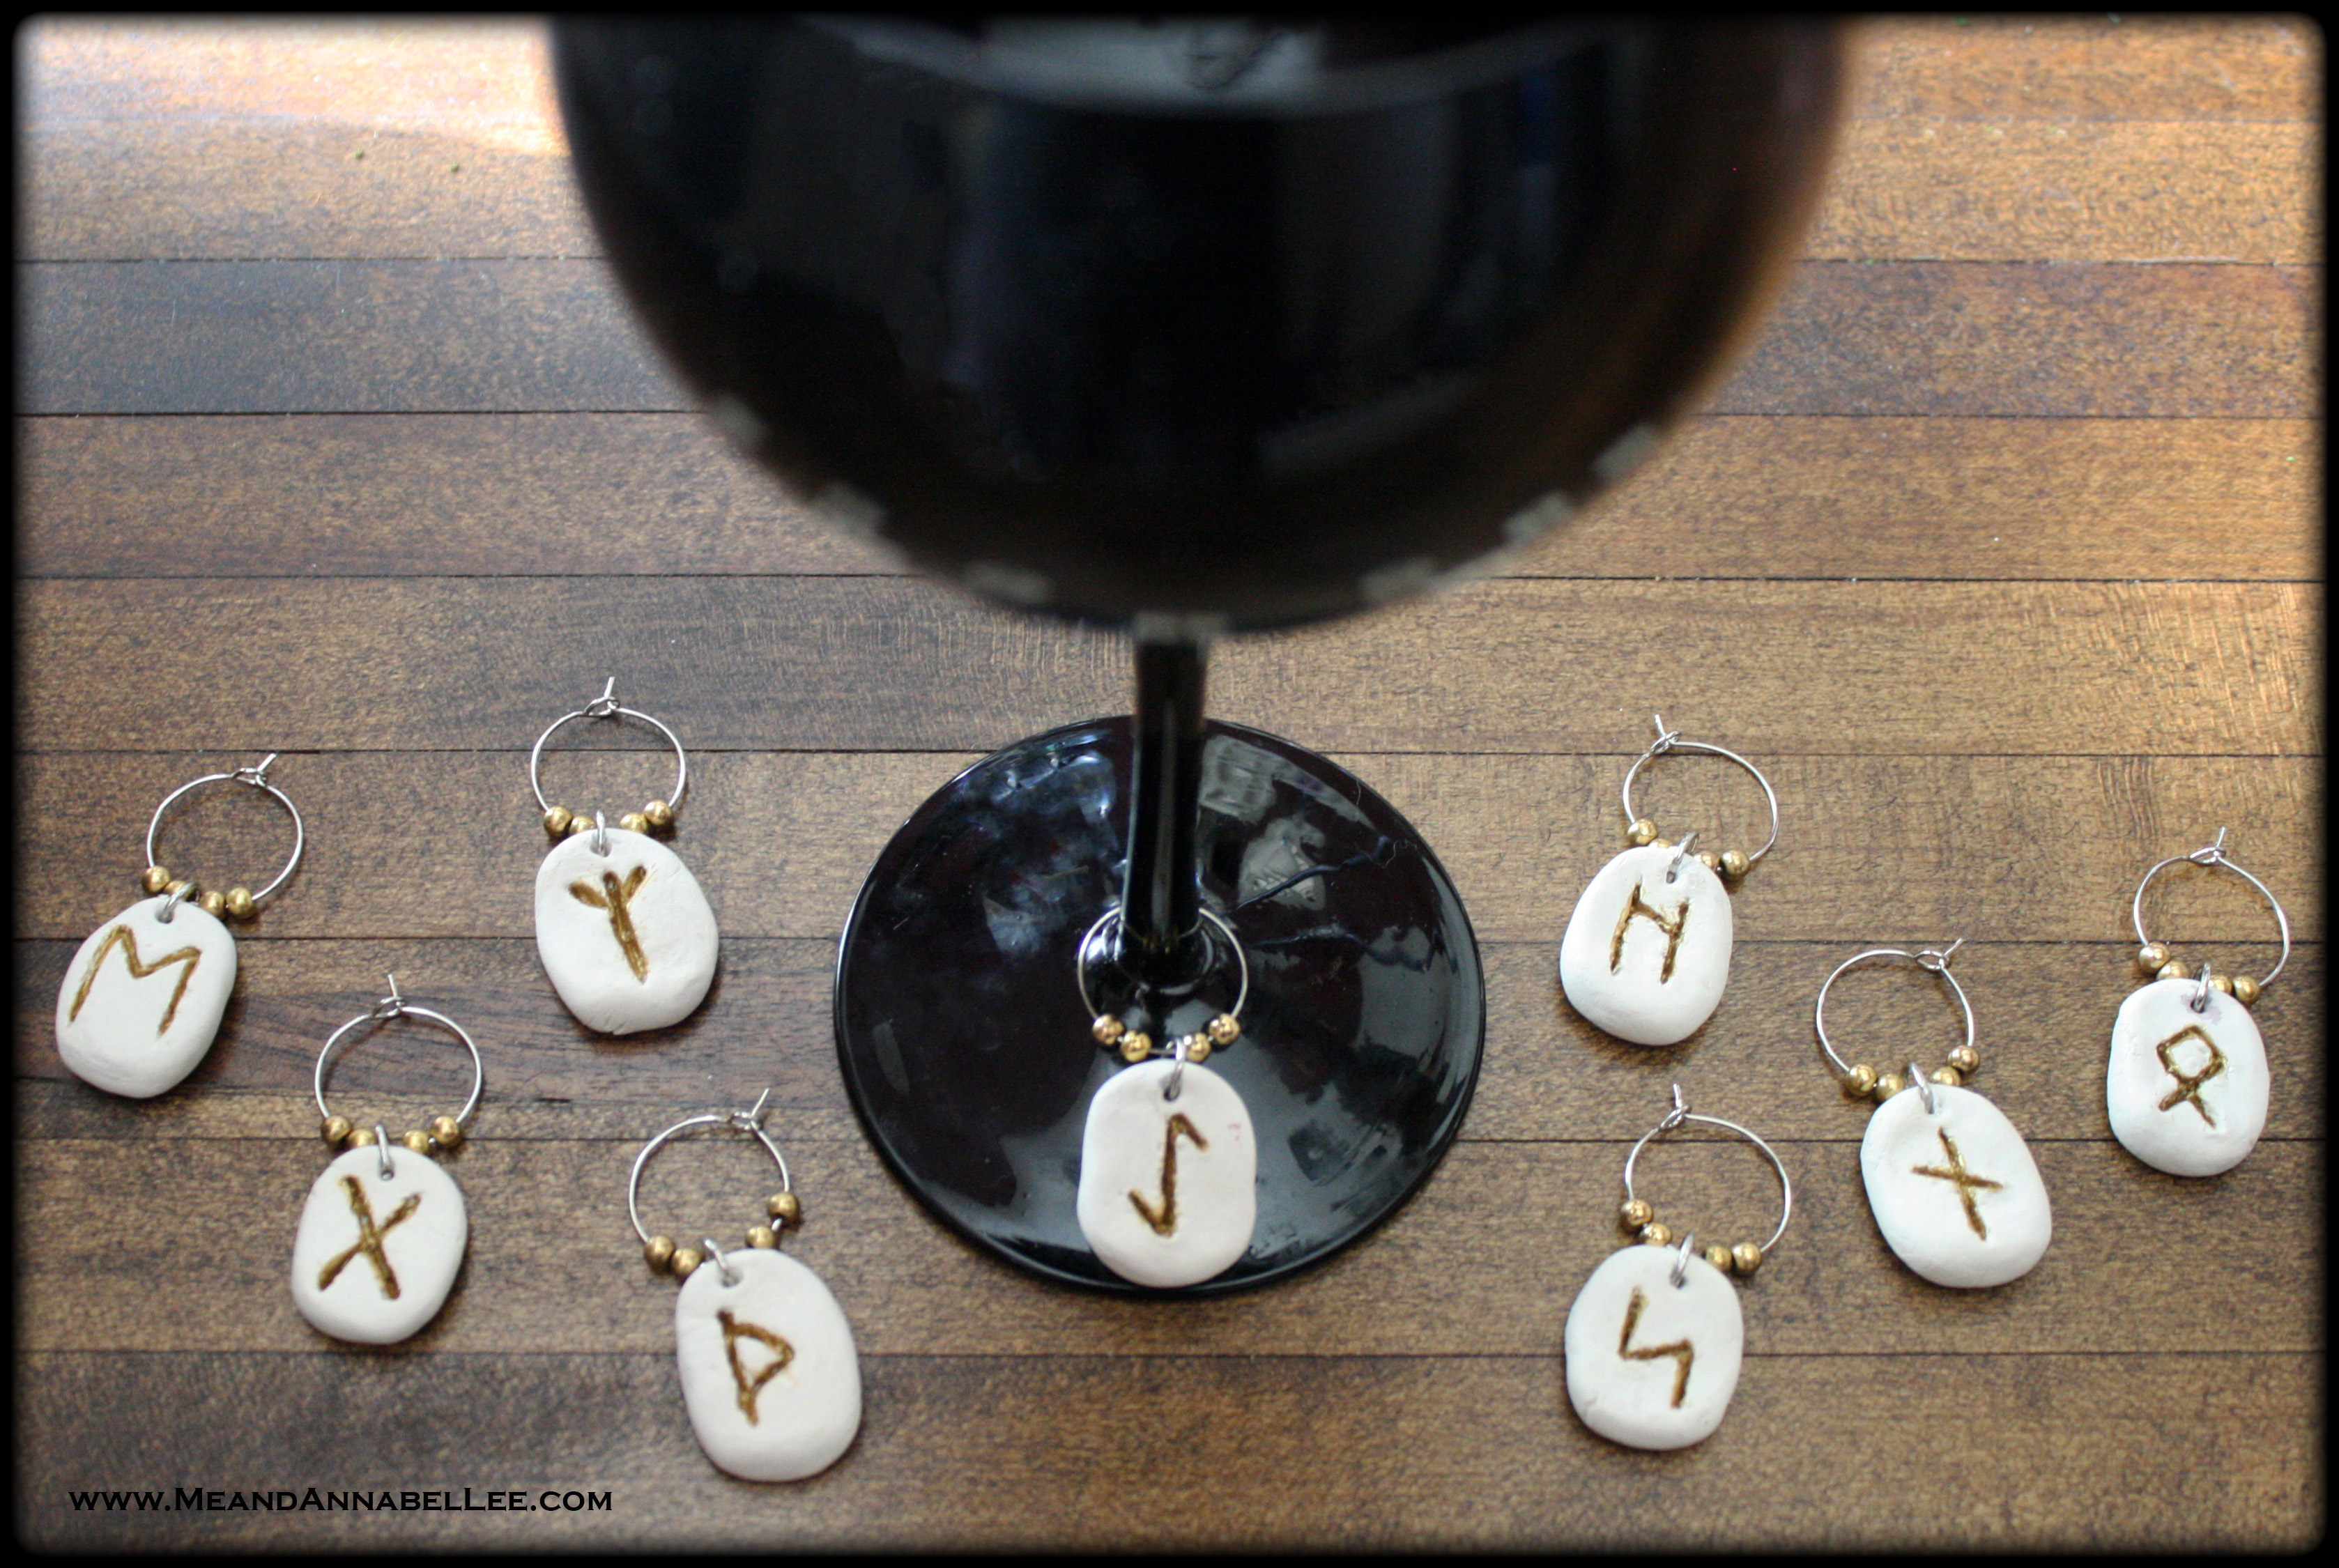 DIY Rune Stone Wine Glass Charms | Pagan Divination Tools | Witchcraft Dinner Party and Table Setting | Halloween Crafts | Paper Clay | www.MeandAnnabelLee.com